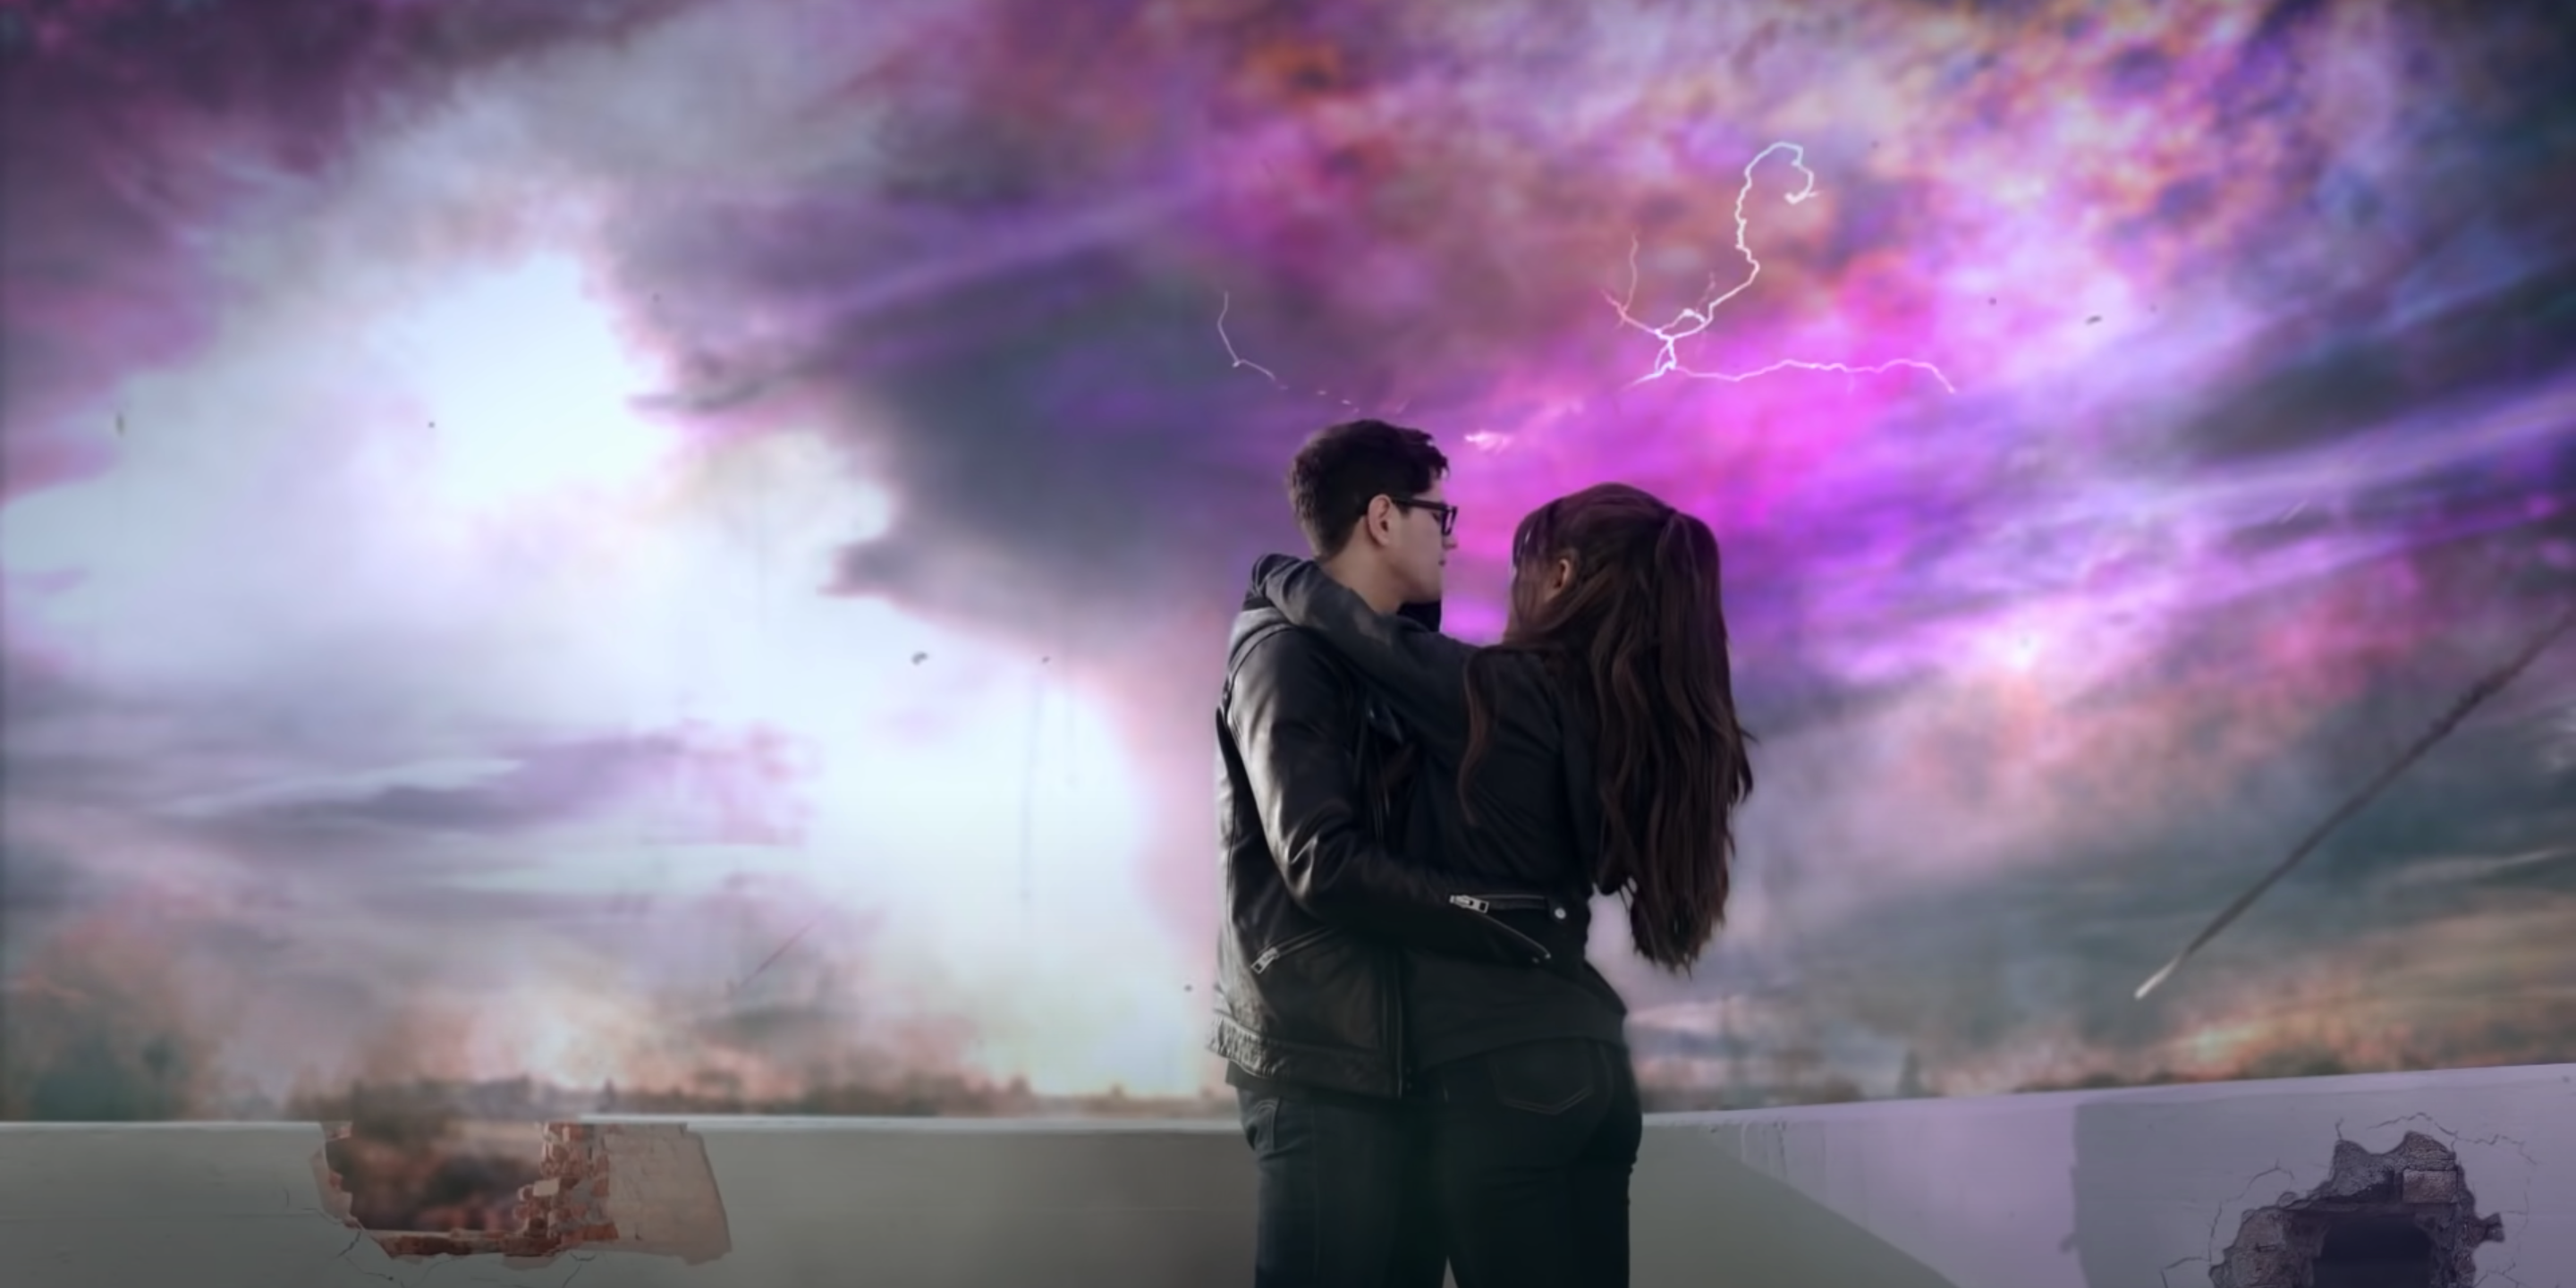 Image of Ariana Grade embracing a boy in front of a purple lightning storm in the video for One Last Time.